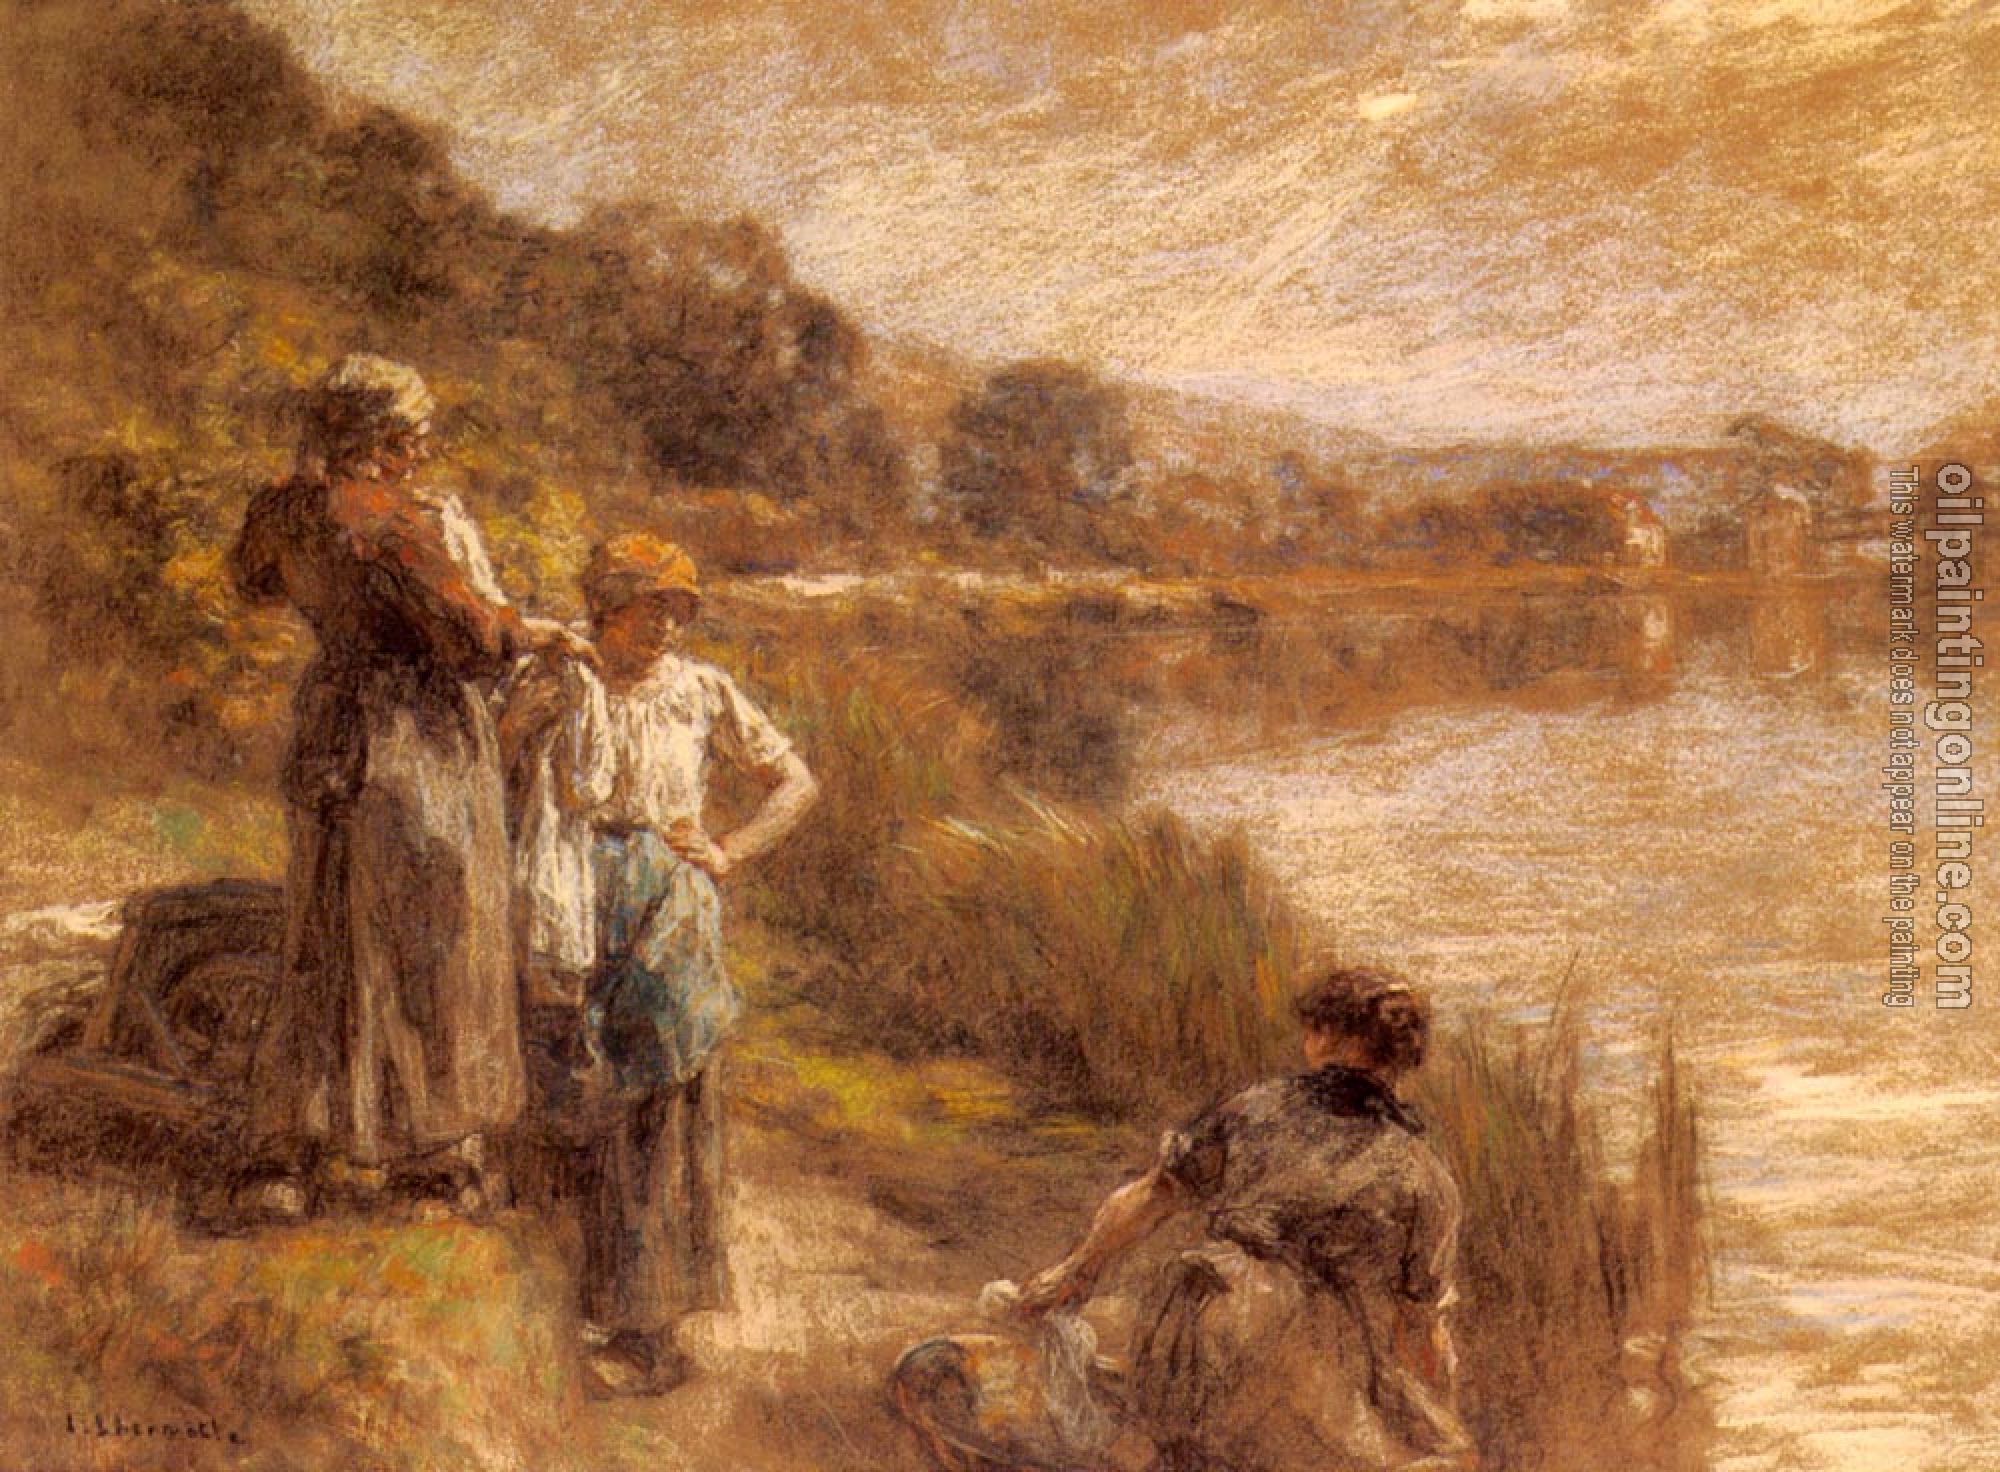 Lhermitte, Leon Augustin - Washerwomen by the Banks of the Marne